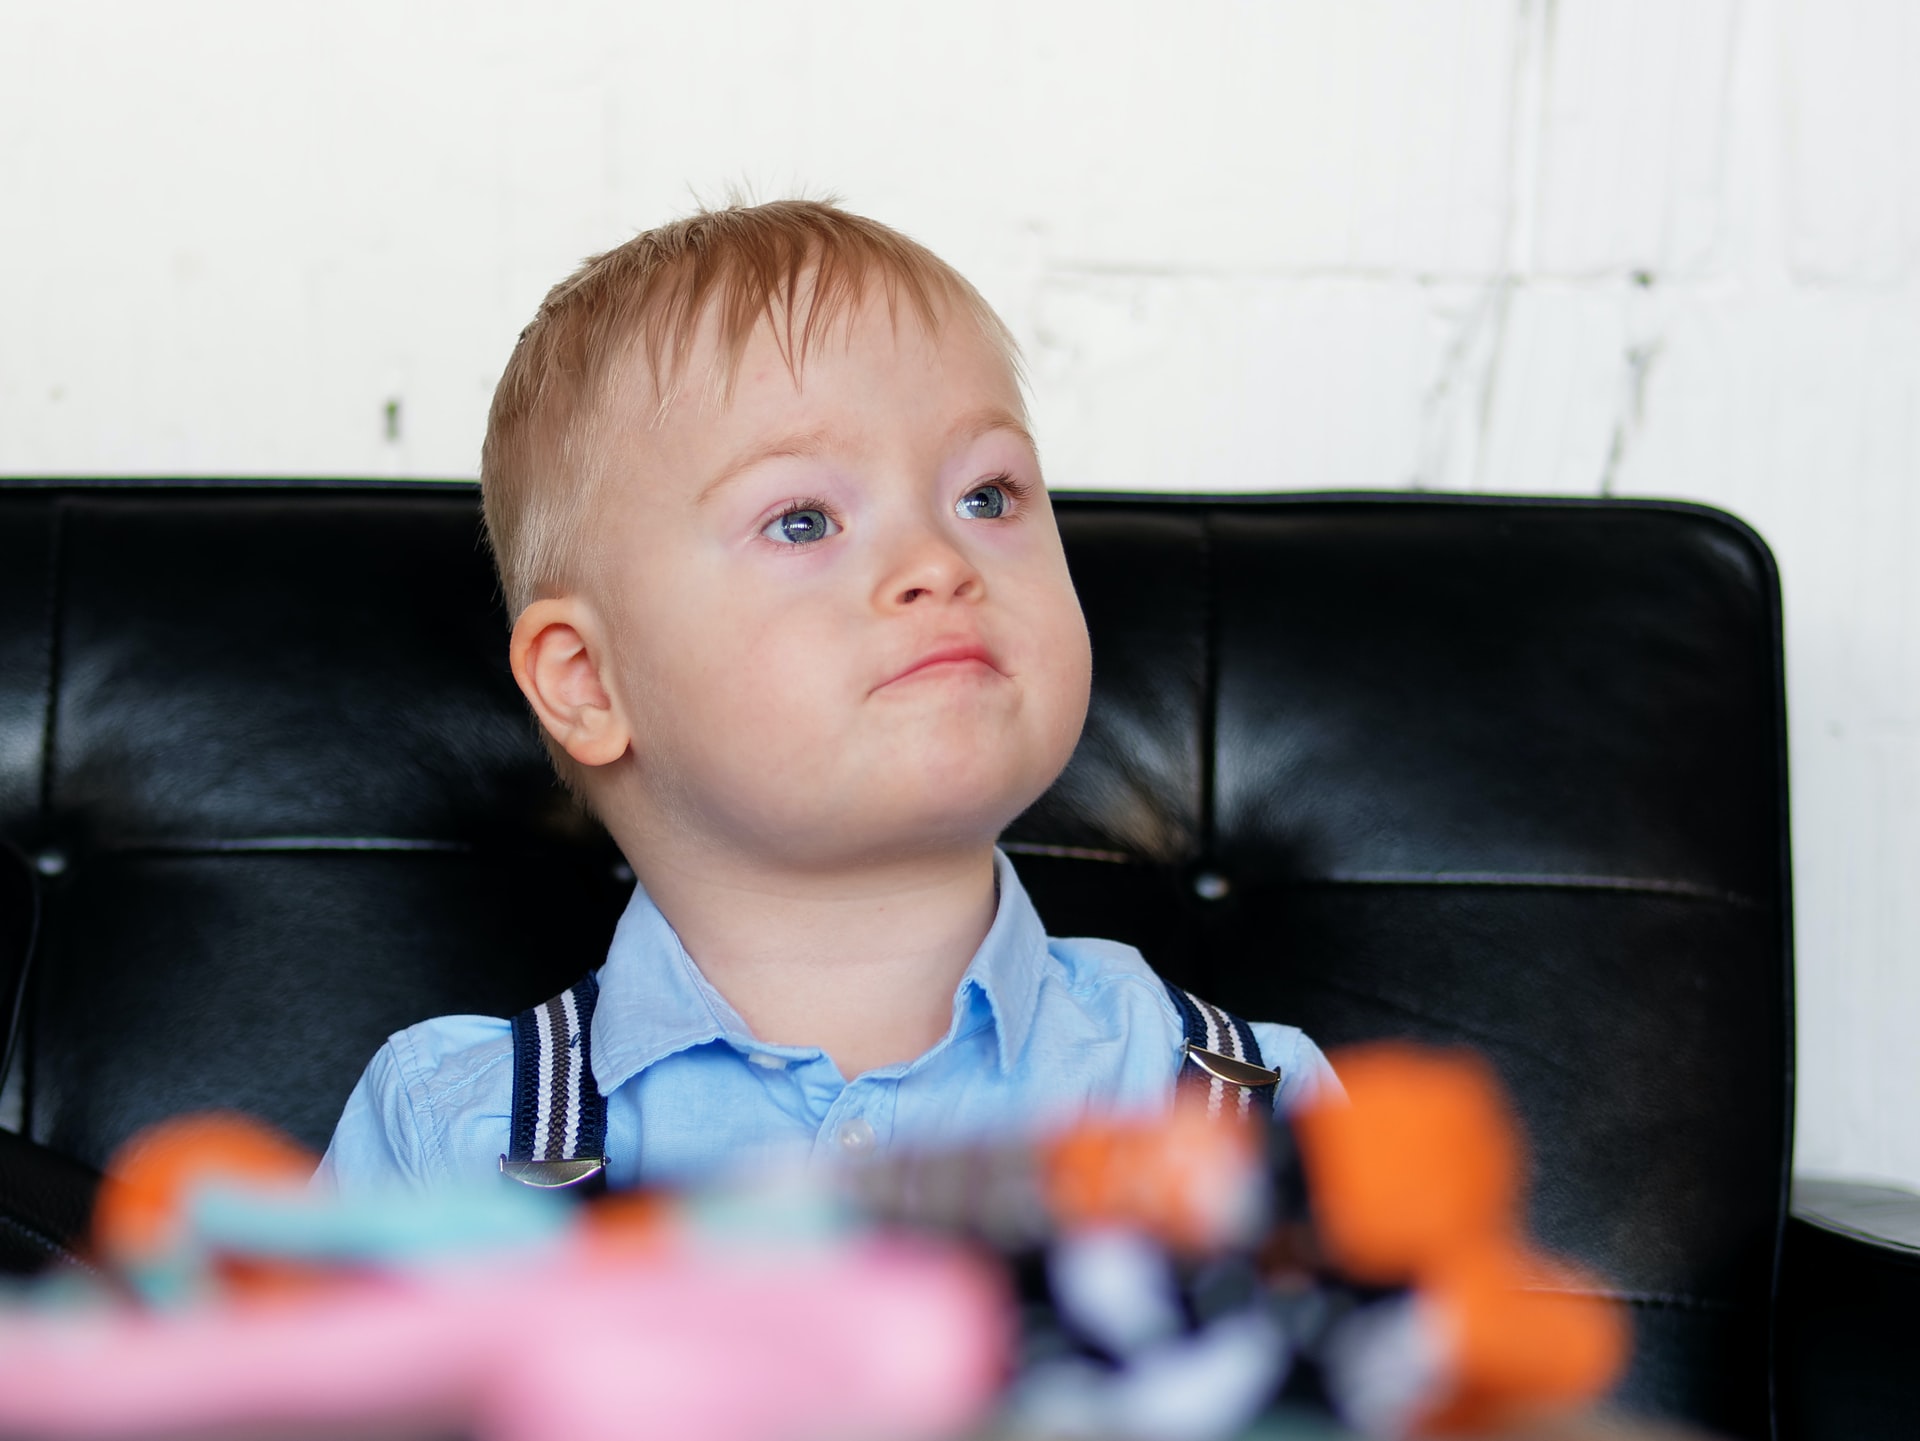 A baby in a blue shirt with a closed mouth is watching attentively while sitting on a black couch